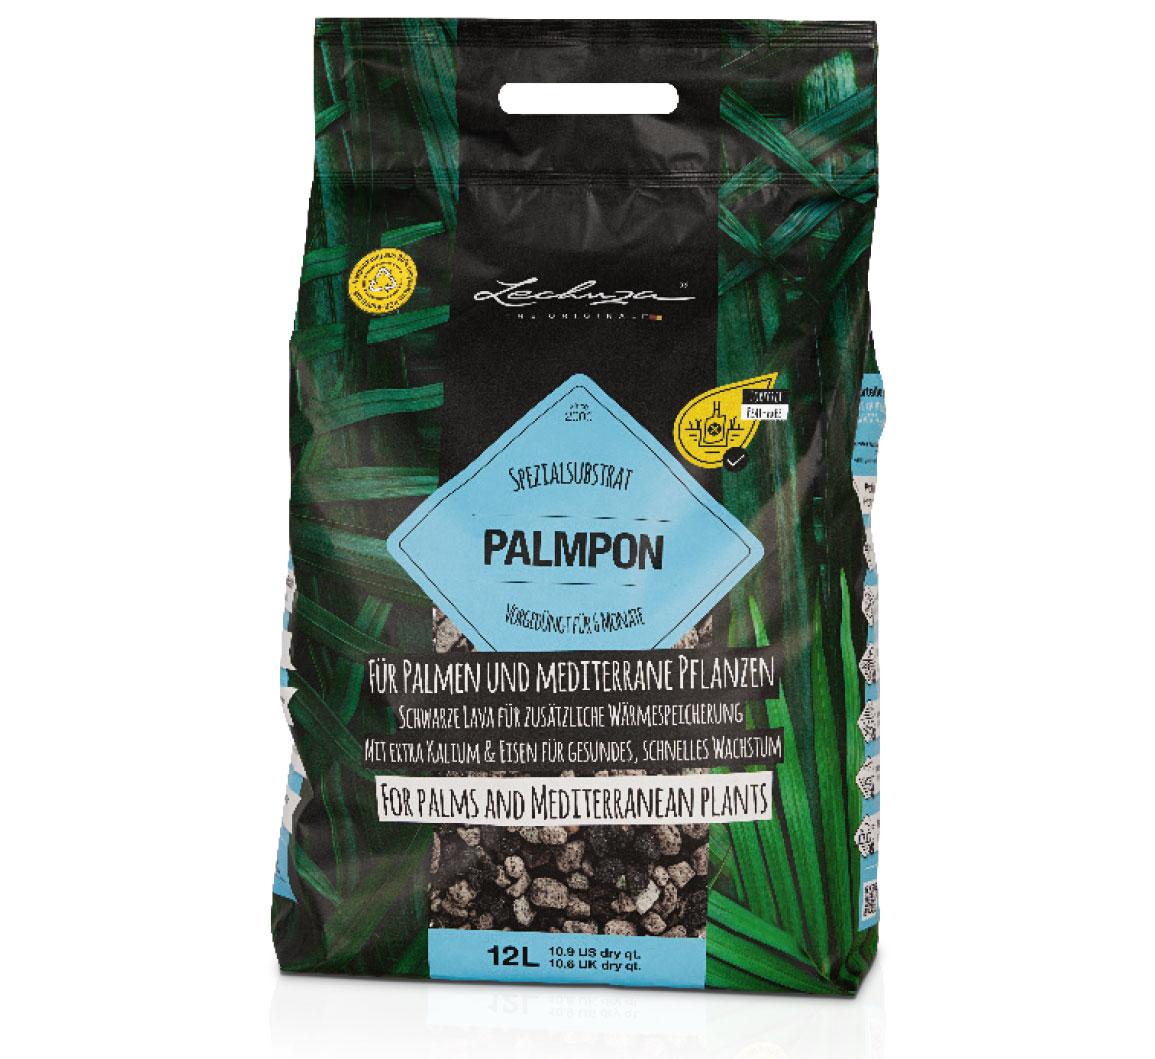 PALMPON: For palms and Mediterranean plants